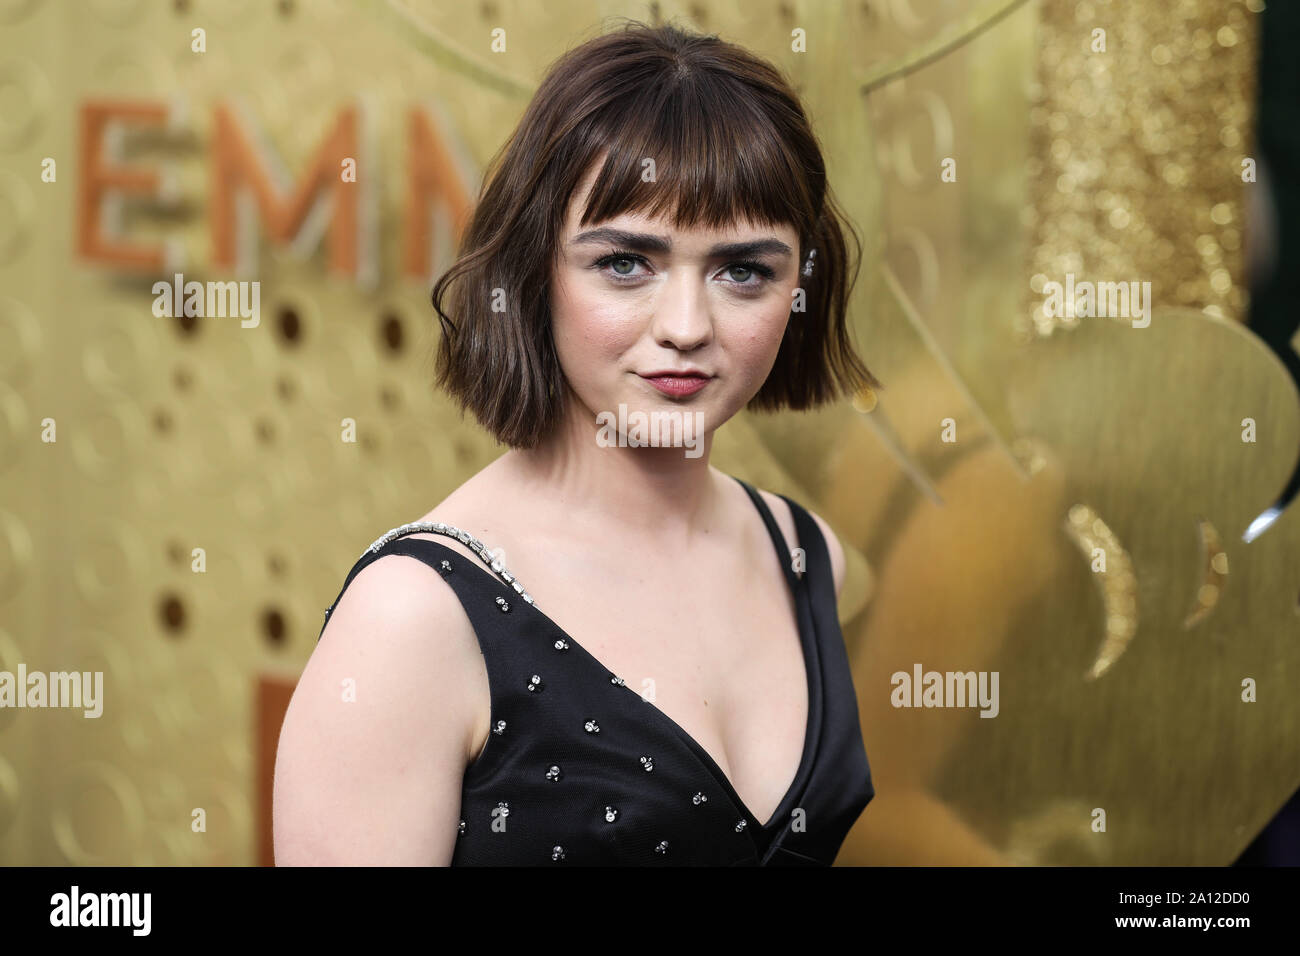 Los Angeles, United States. 22nd Sep, 2019. LOS ANGELES, CALIFORNIA, USA - SEPTEMBER 22: Maisie Williams arrives at the 71st Annual Primetime Emmy Awards held at Microsoft Theater L.A. Live on September 22, 2019 in Los Angeles, California, United States. (Photo by Xavier Collin/Image Press Agency) Credit: Image Press Agency/Alamy Live News Stock Photo